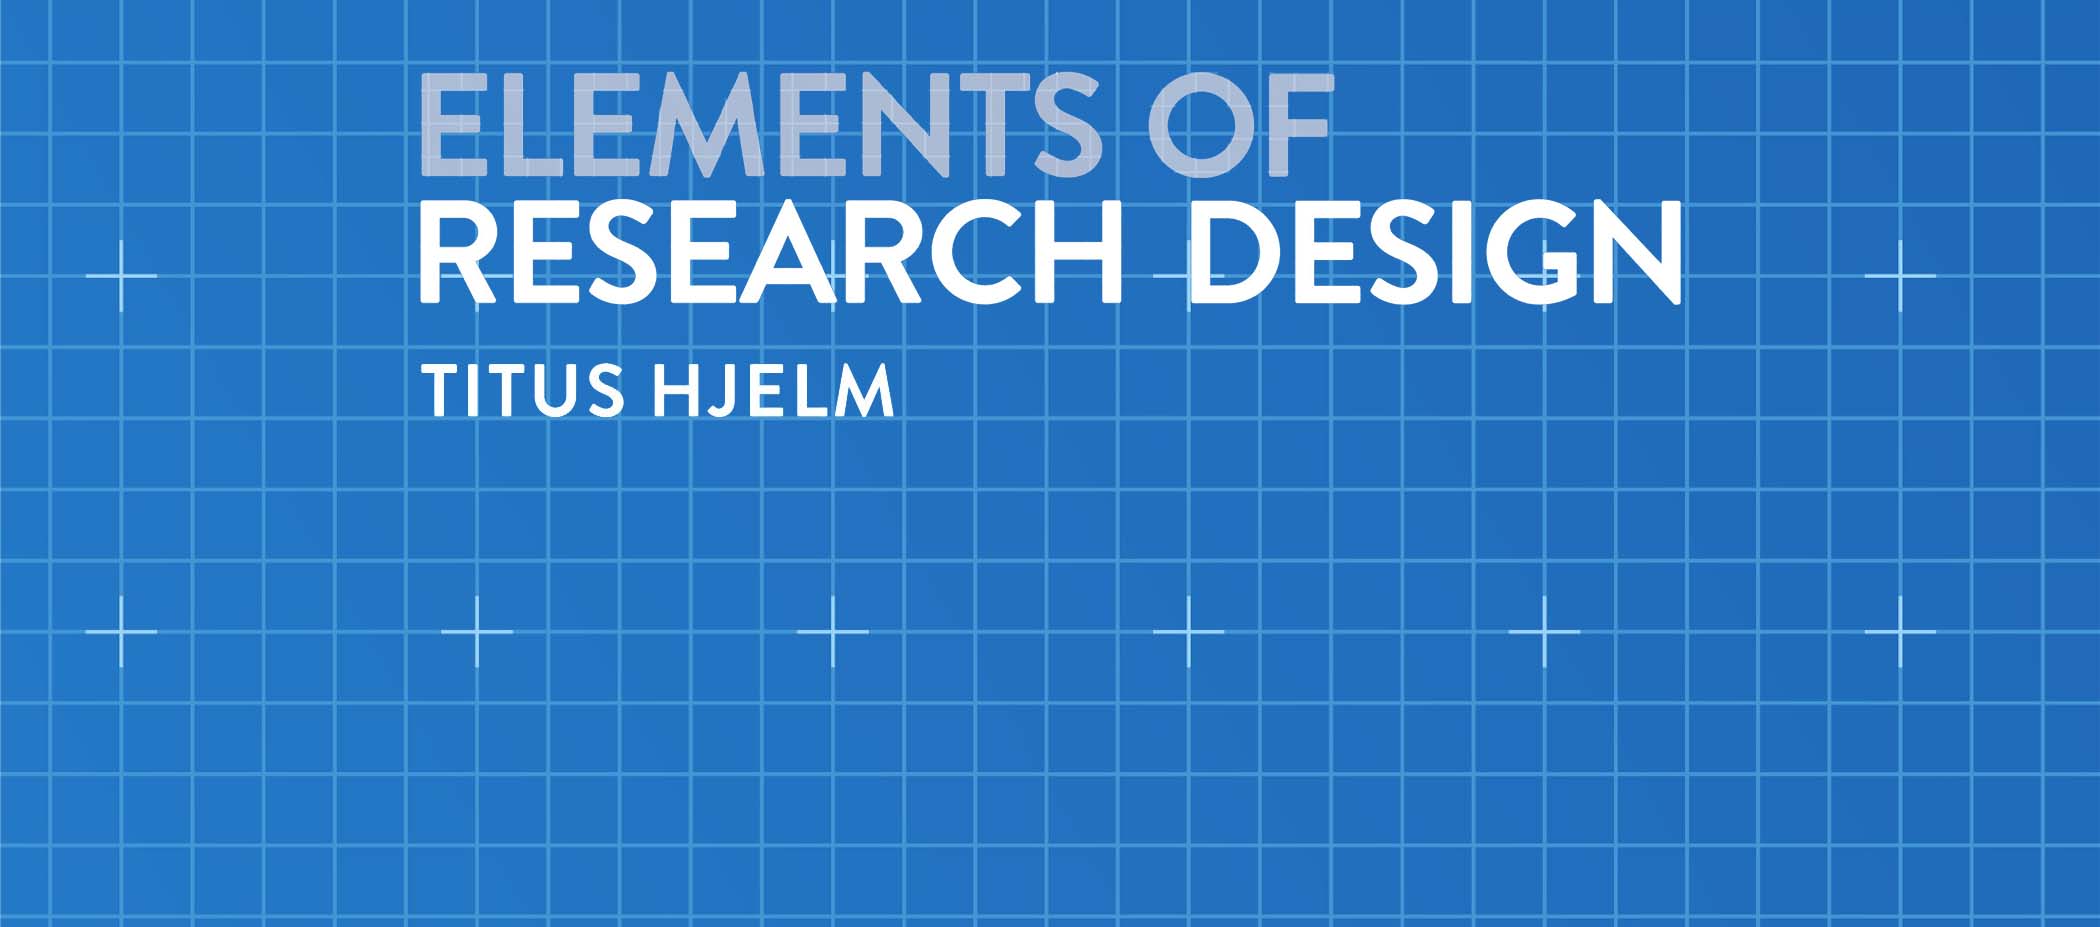 Elements-of-Research-Design.jpg